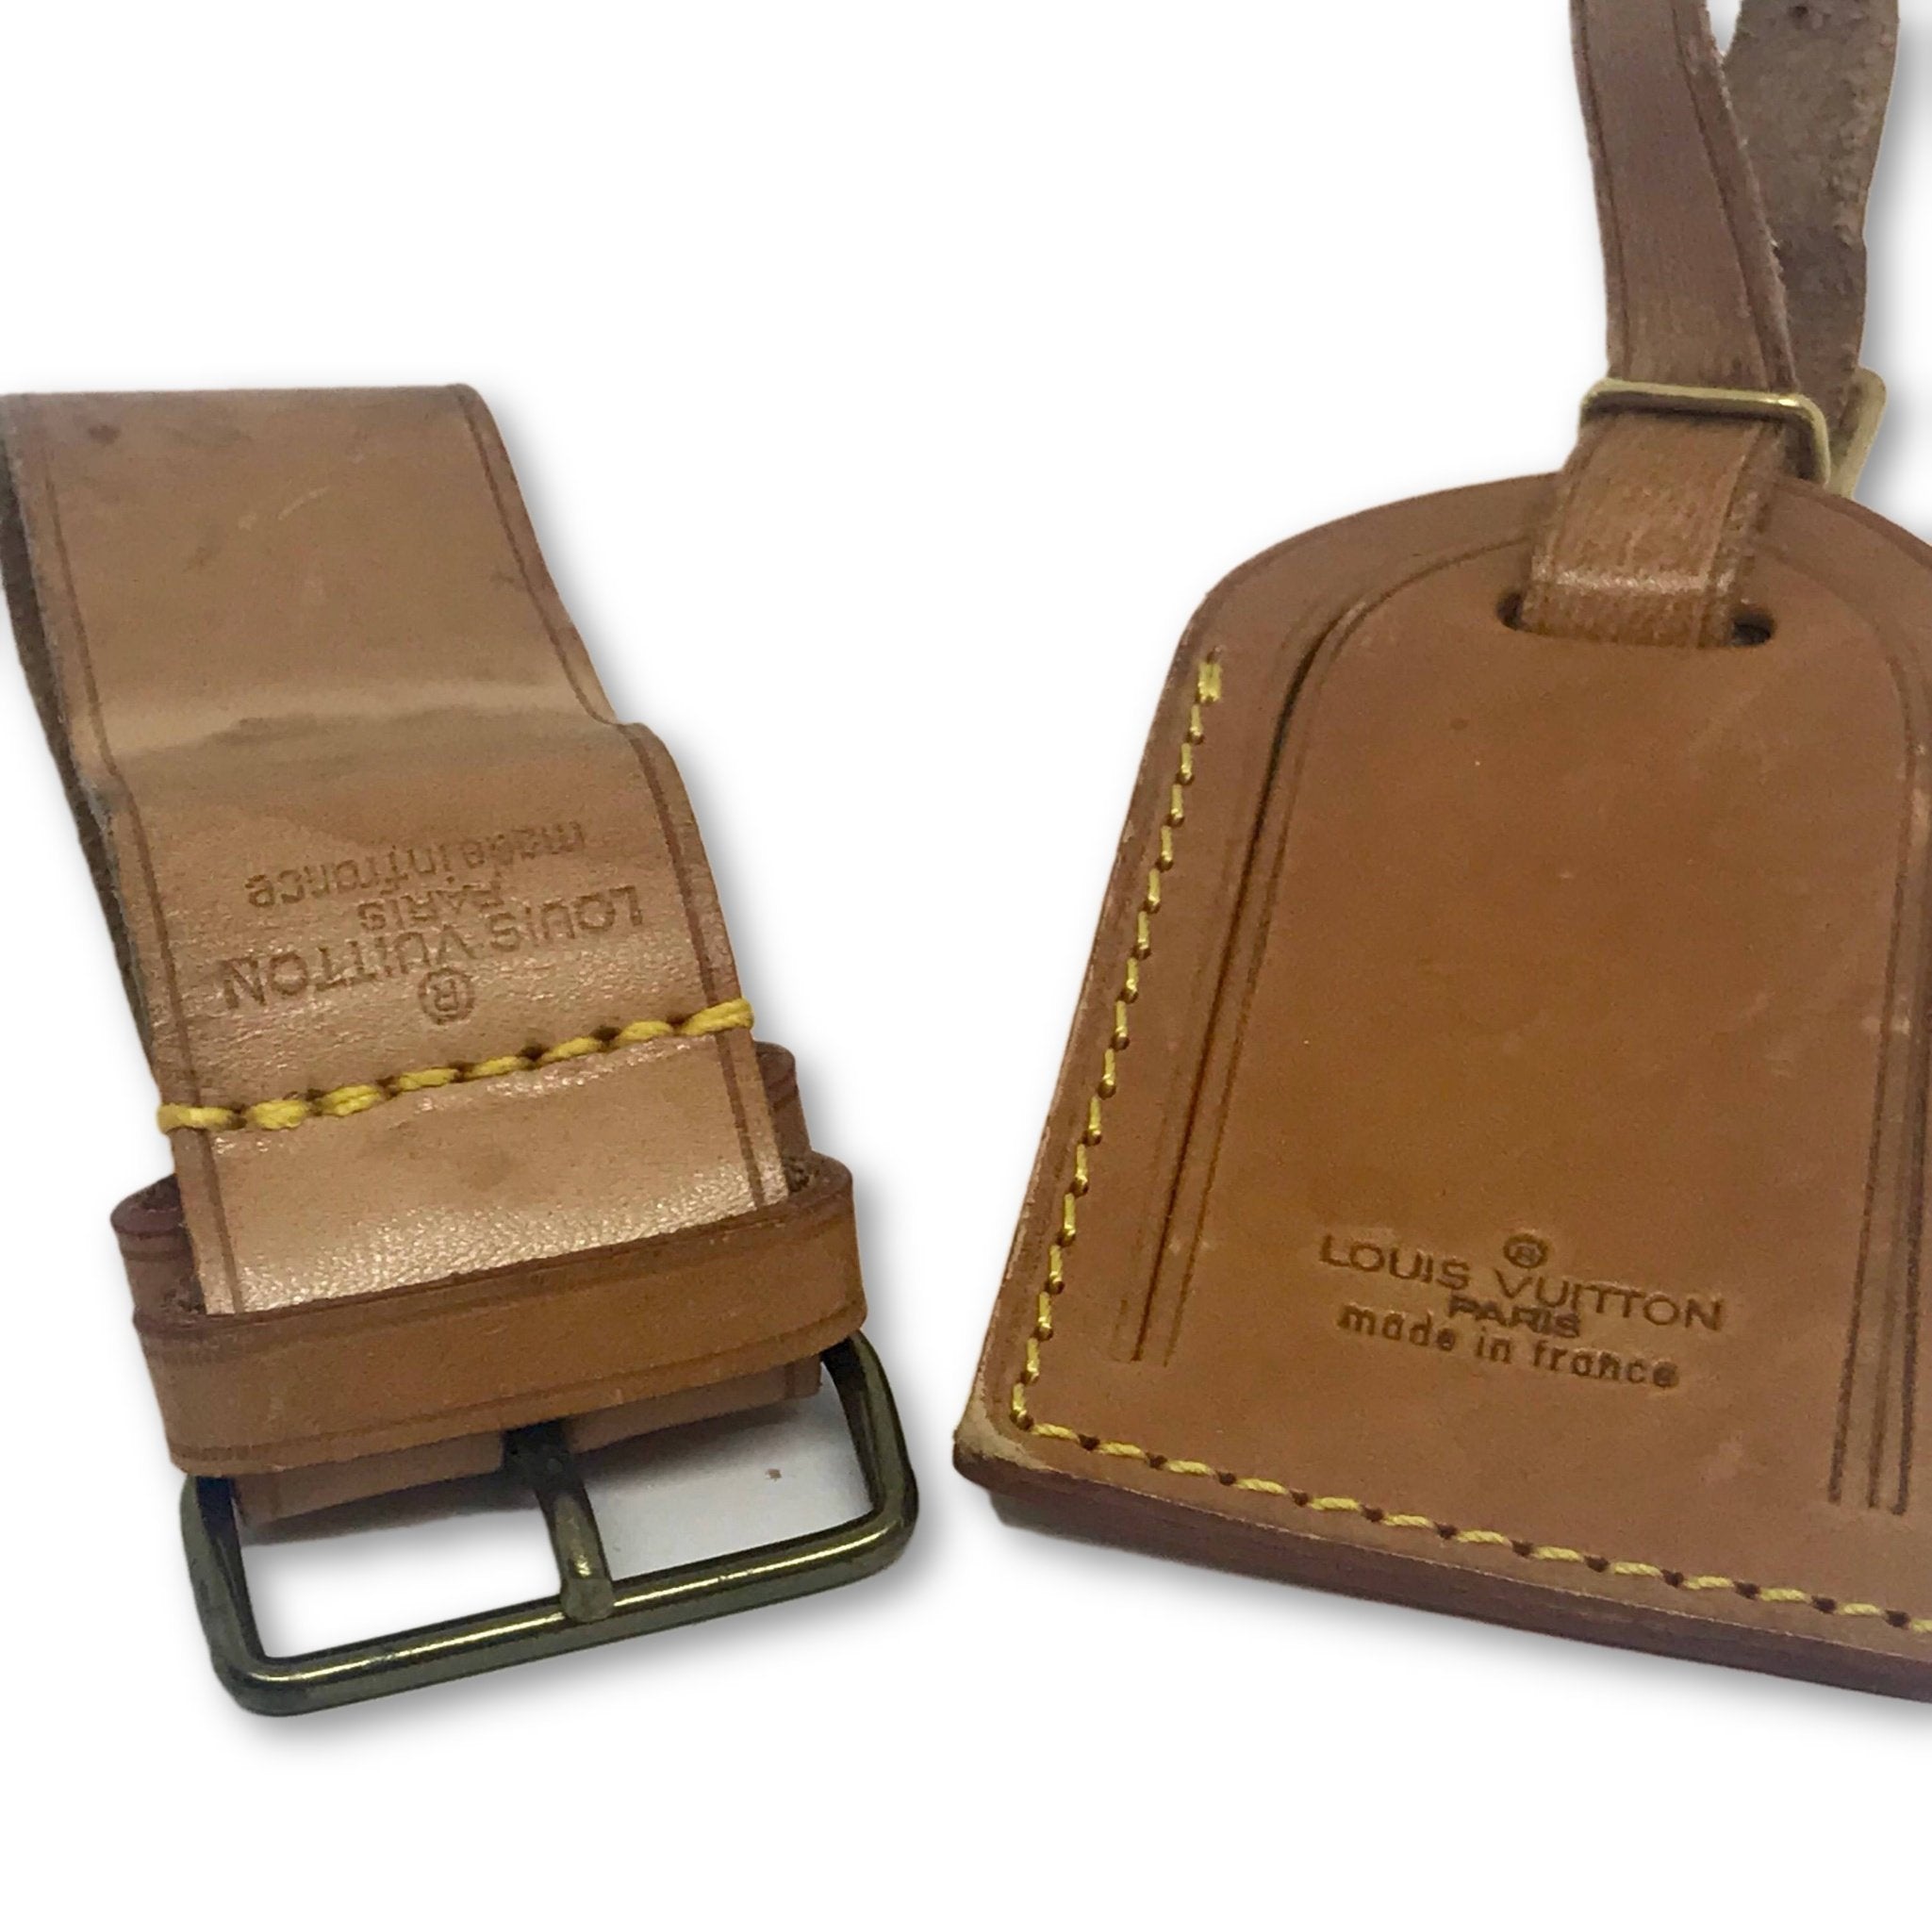 Louis Vuitton Dark Green Leather Luggage Tag and Handle Fastener - Yoogi's  Closet